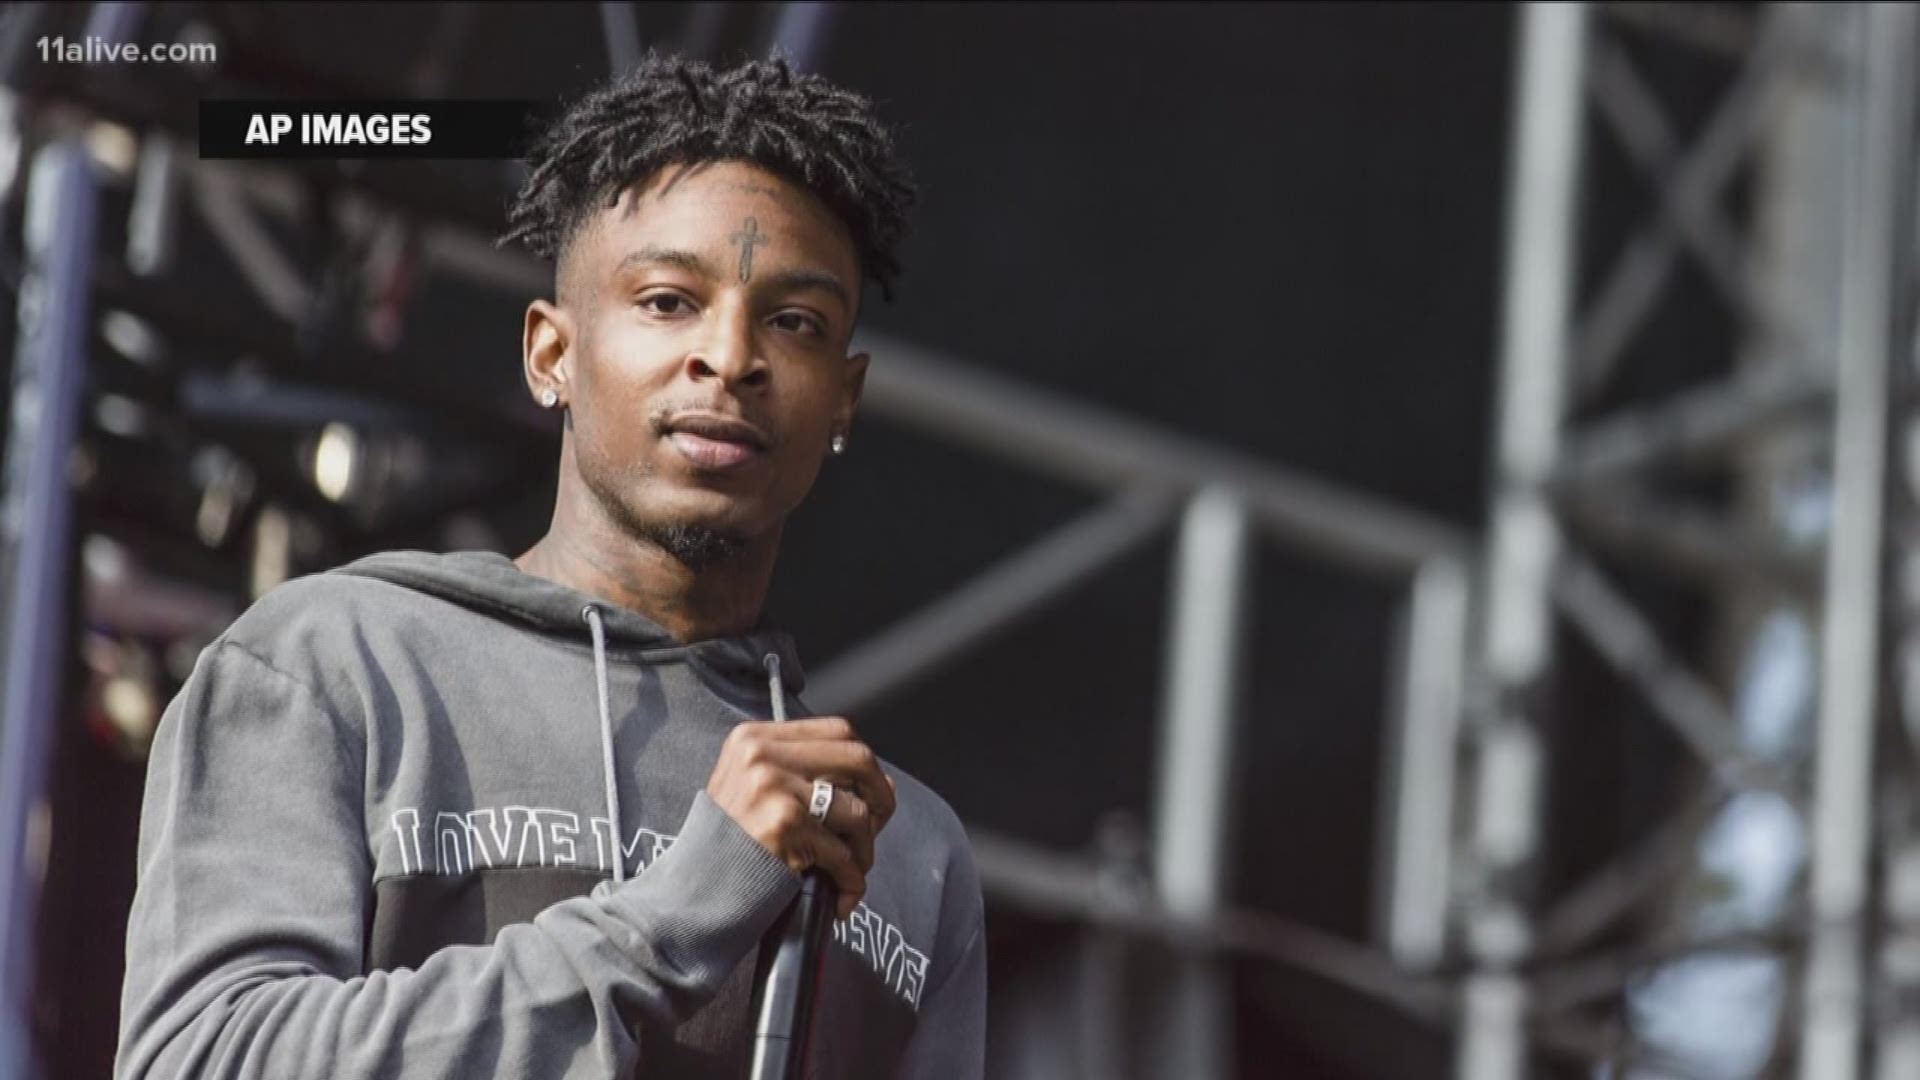 21 Savage, whose real name is She’yaa Bin Abraham-Joseph, has been released on bond amid charges from Immigration Customs Enforcement (ICE) that he has been living in the United States illegally.